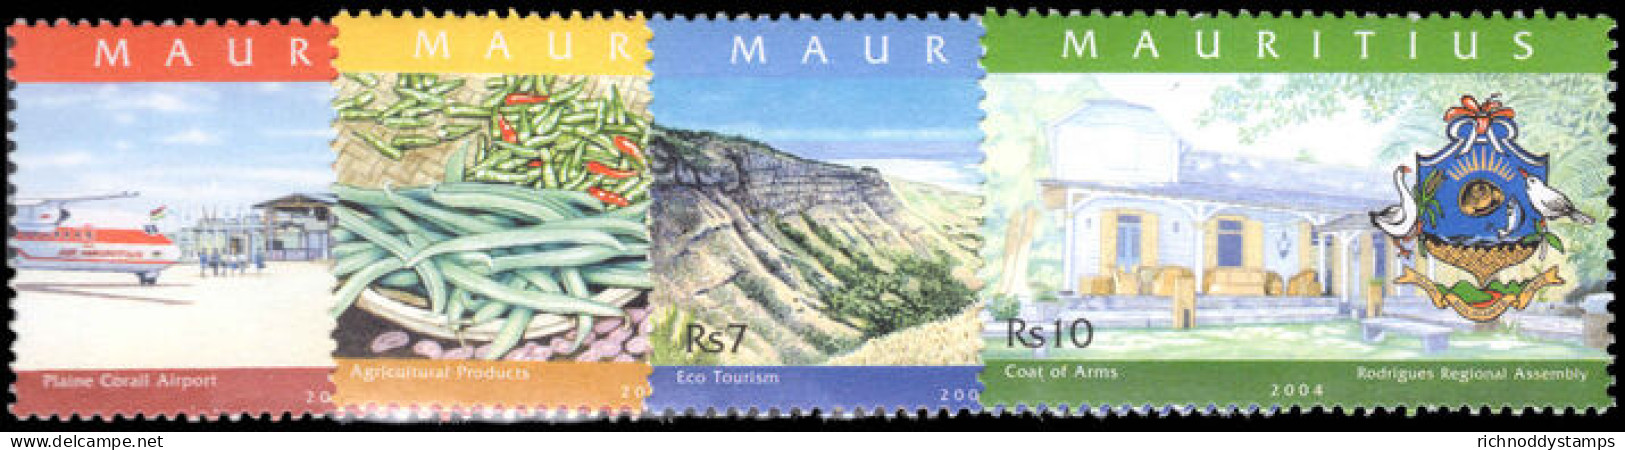 Mauritius 2004 Rodrigues Regional Assembly Unmounted Mint. - Maurice (1968-...)